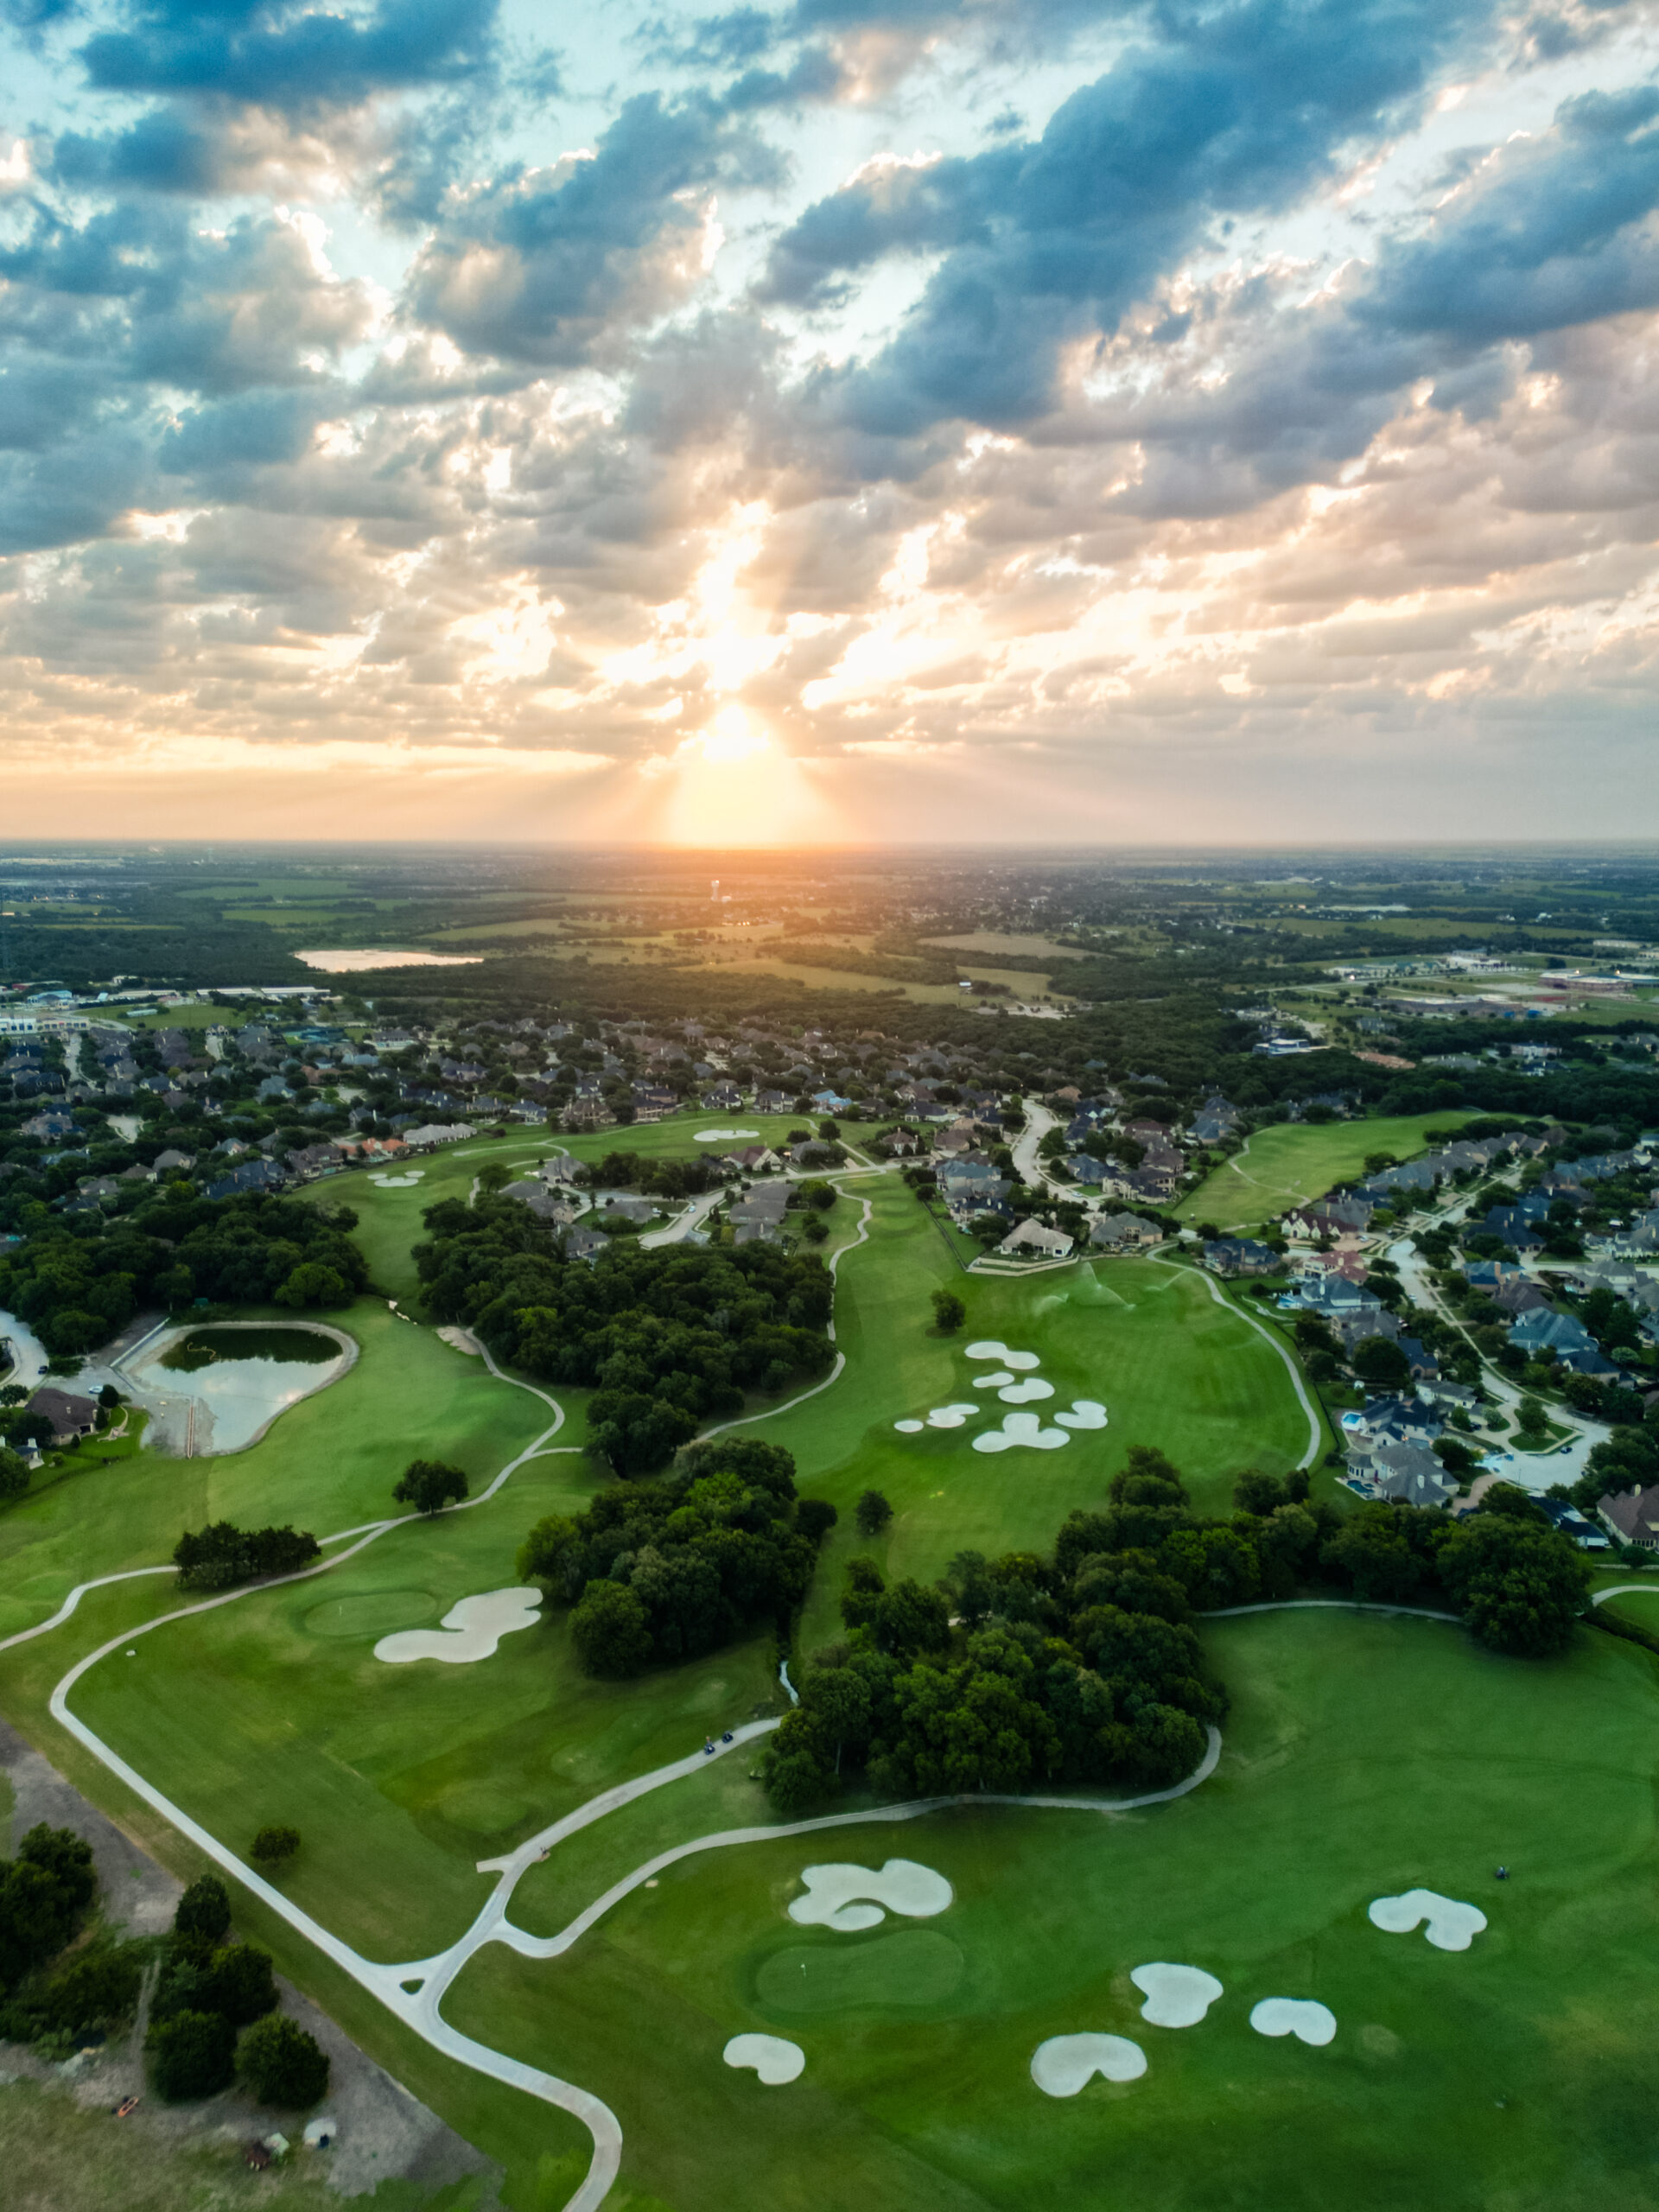 An aerial view of Buffalo Creek Golf Club showing several holes and the sunset.